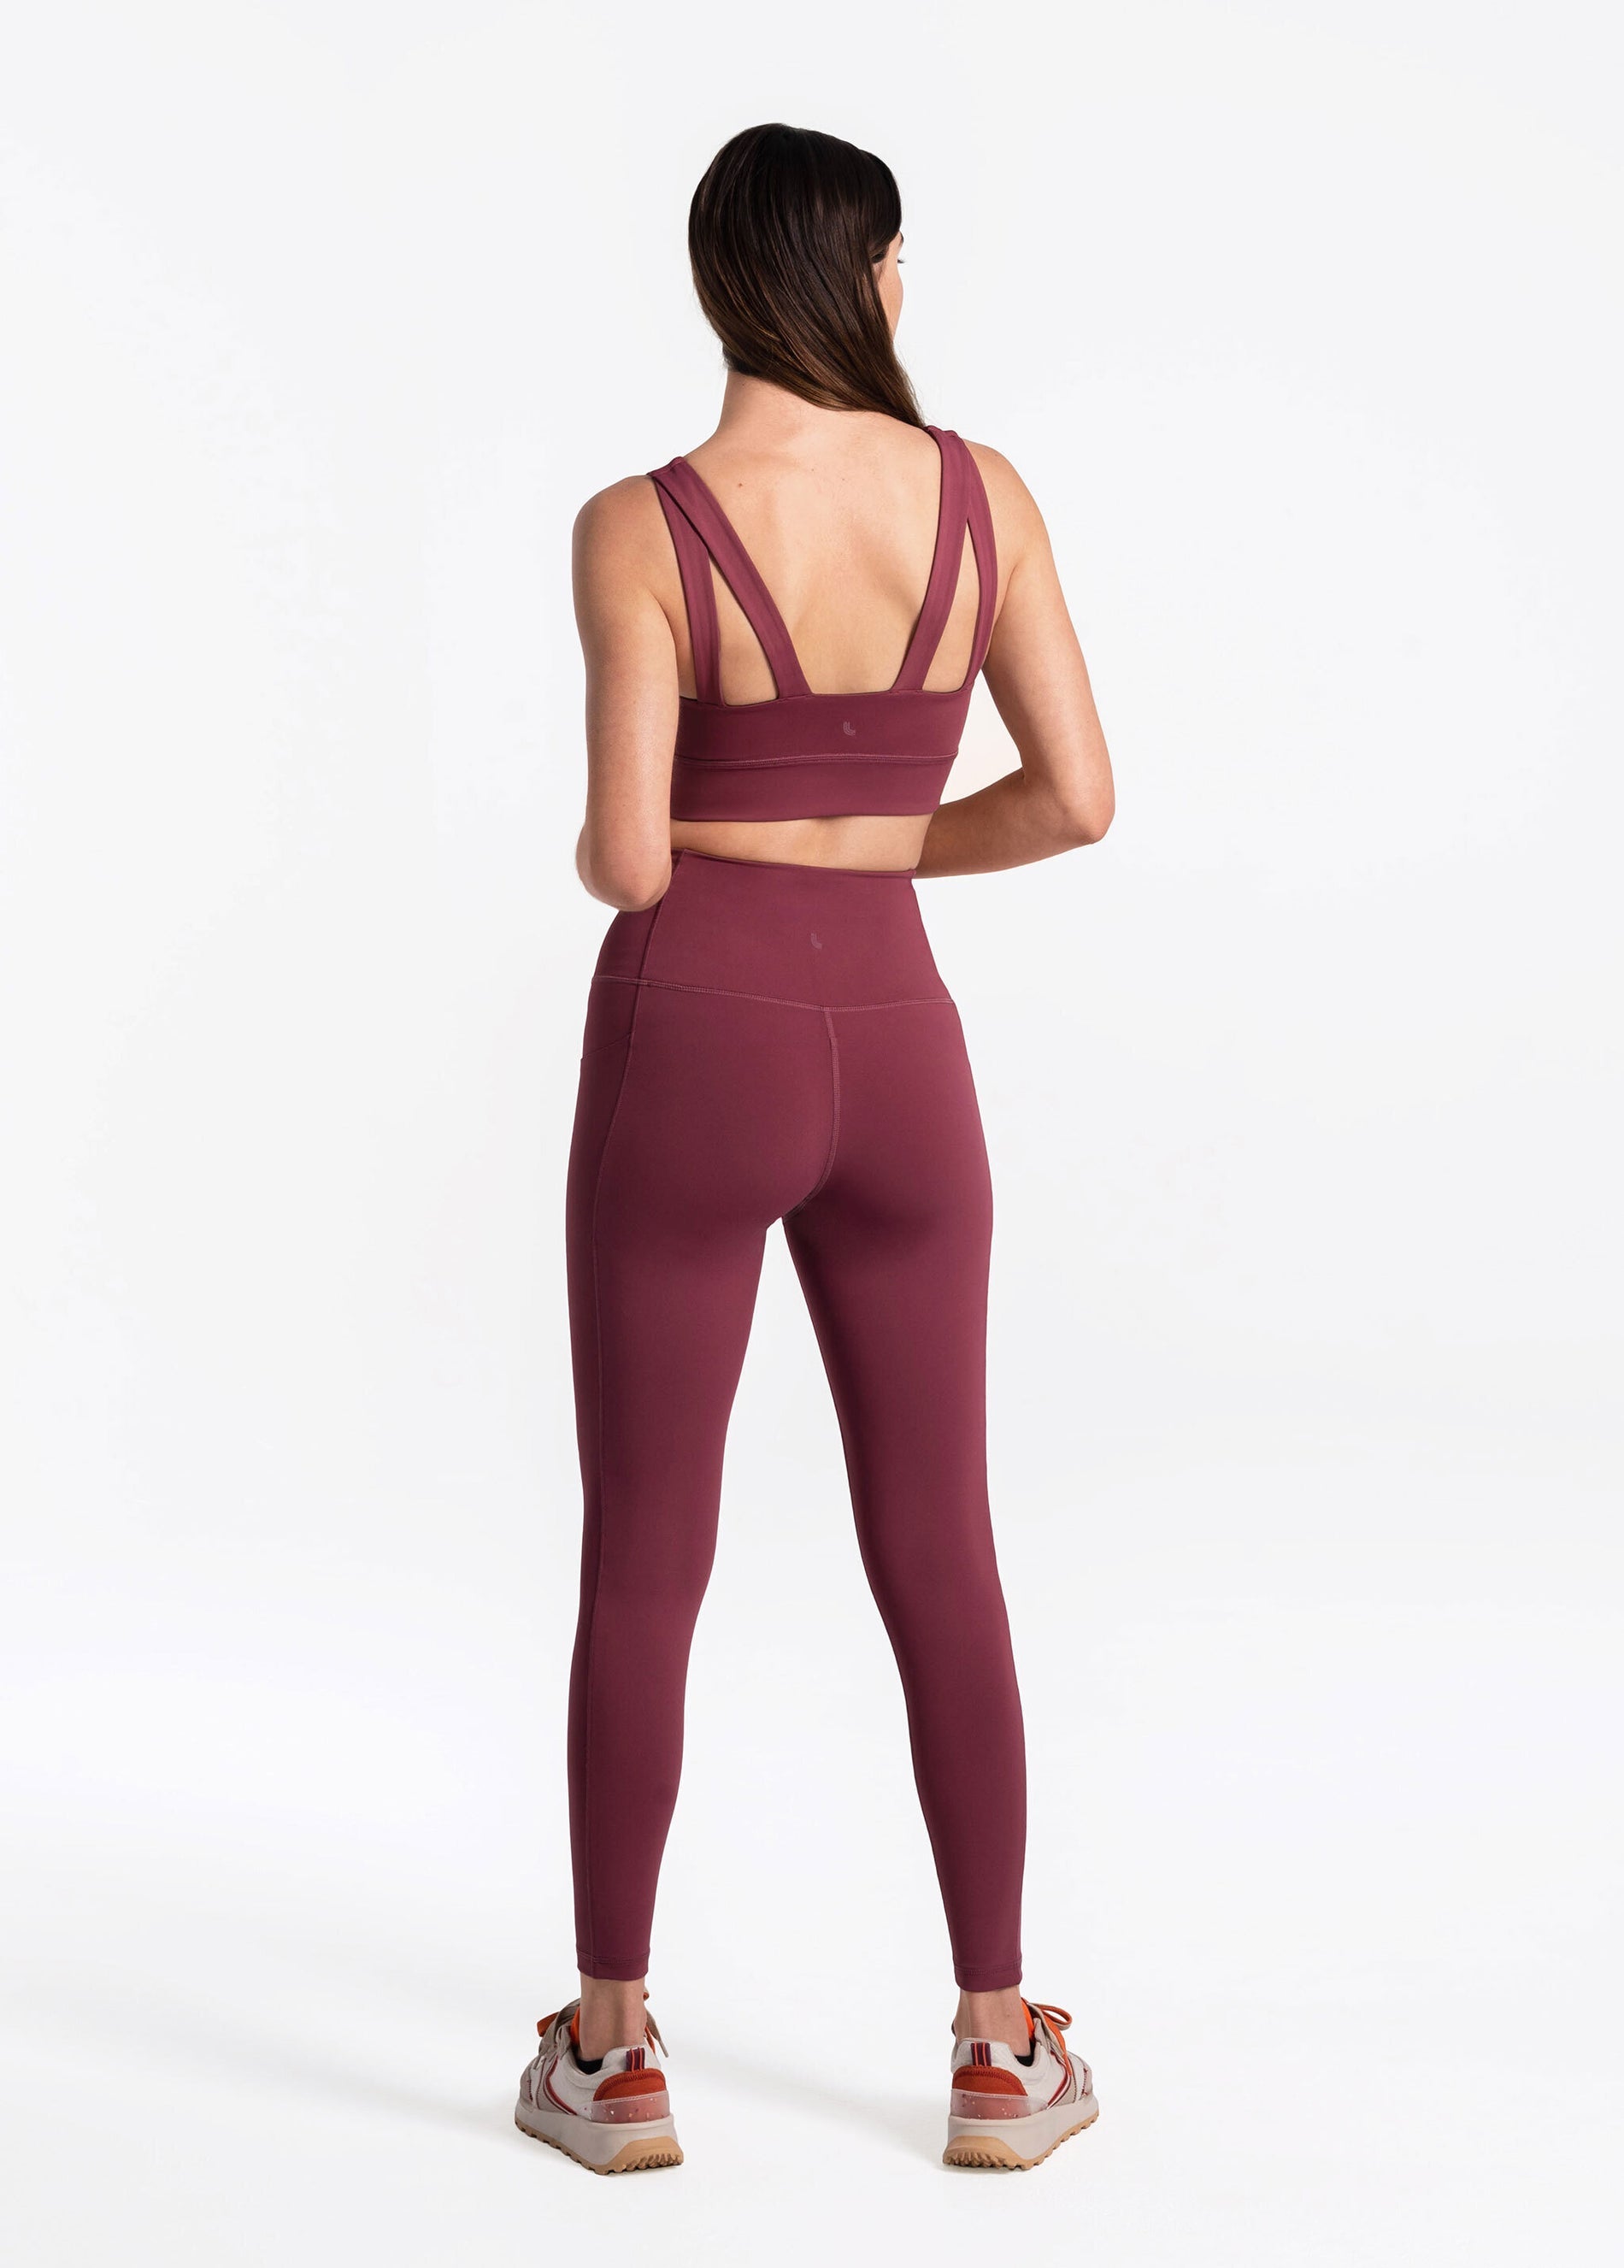 Lole leggings fit amazing! They don't bunch at the ankles the way most of  my leggings do! (5'1, 110 lb) : r/PetiteFashionAdvice